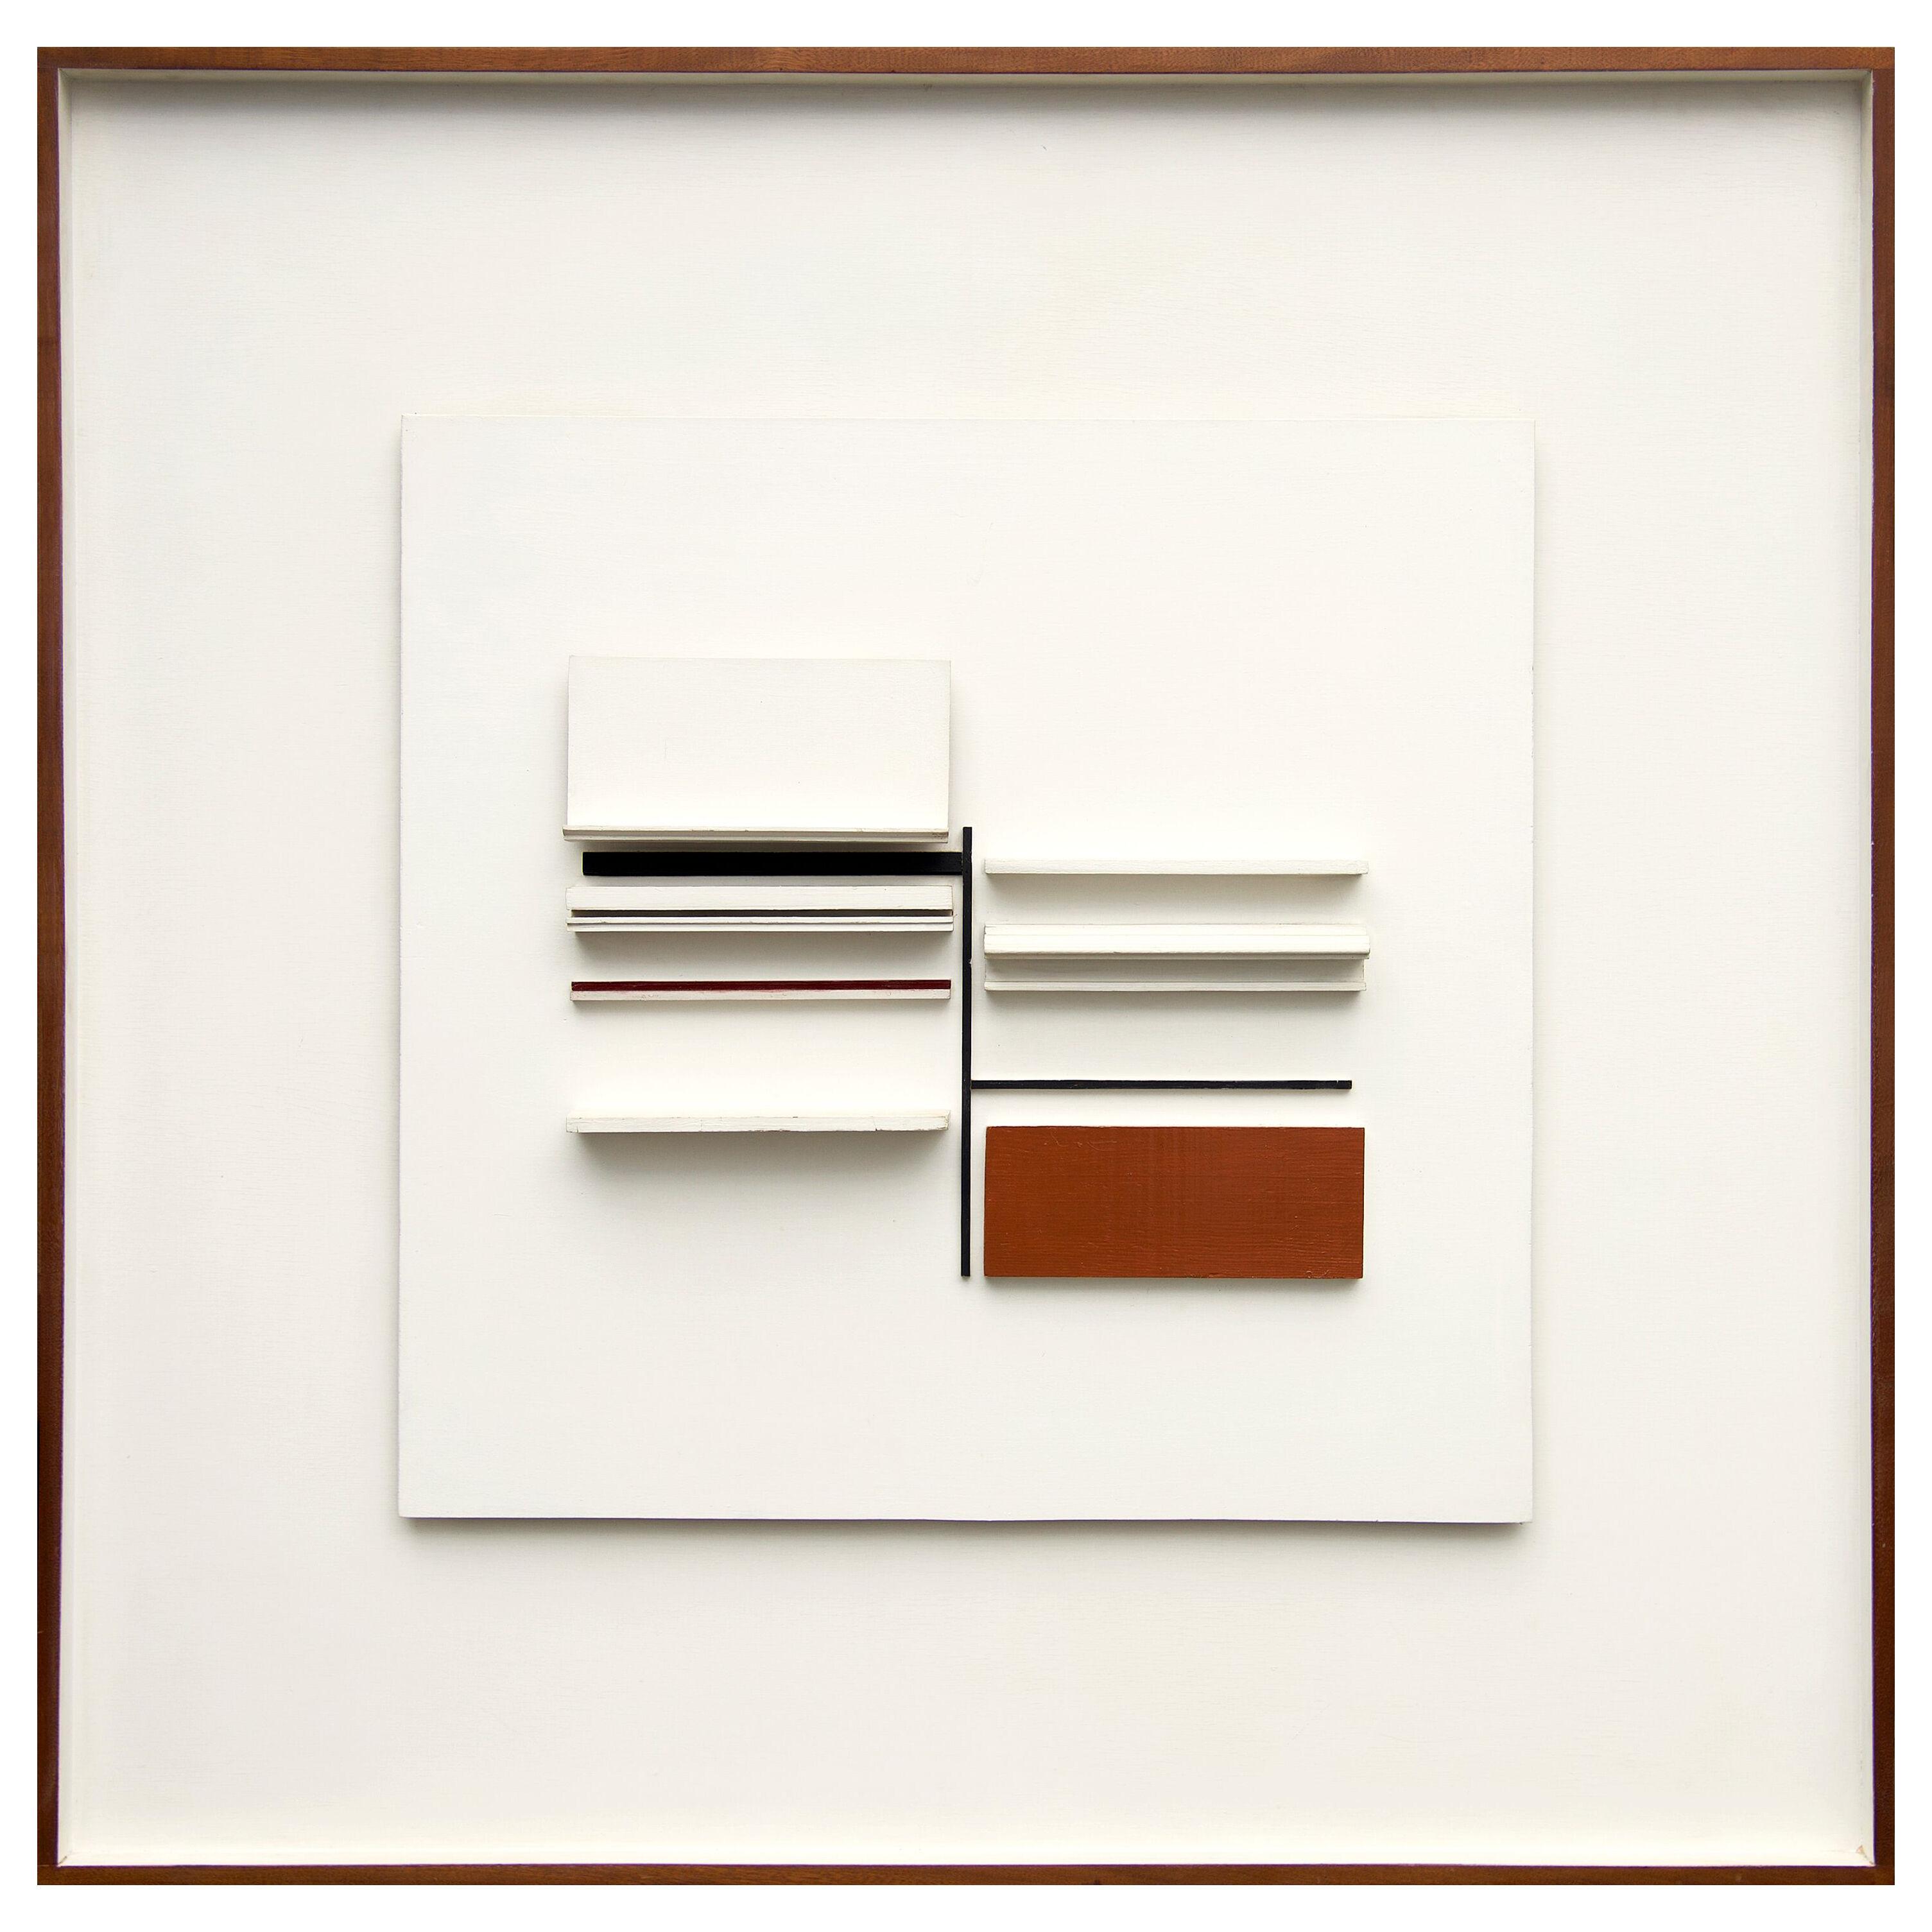 Abstract in White Black Maroon and Ochre, 1966-67